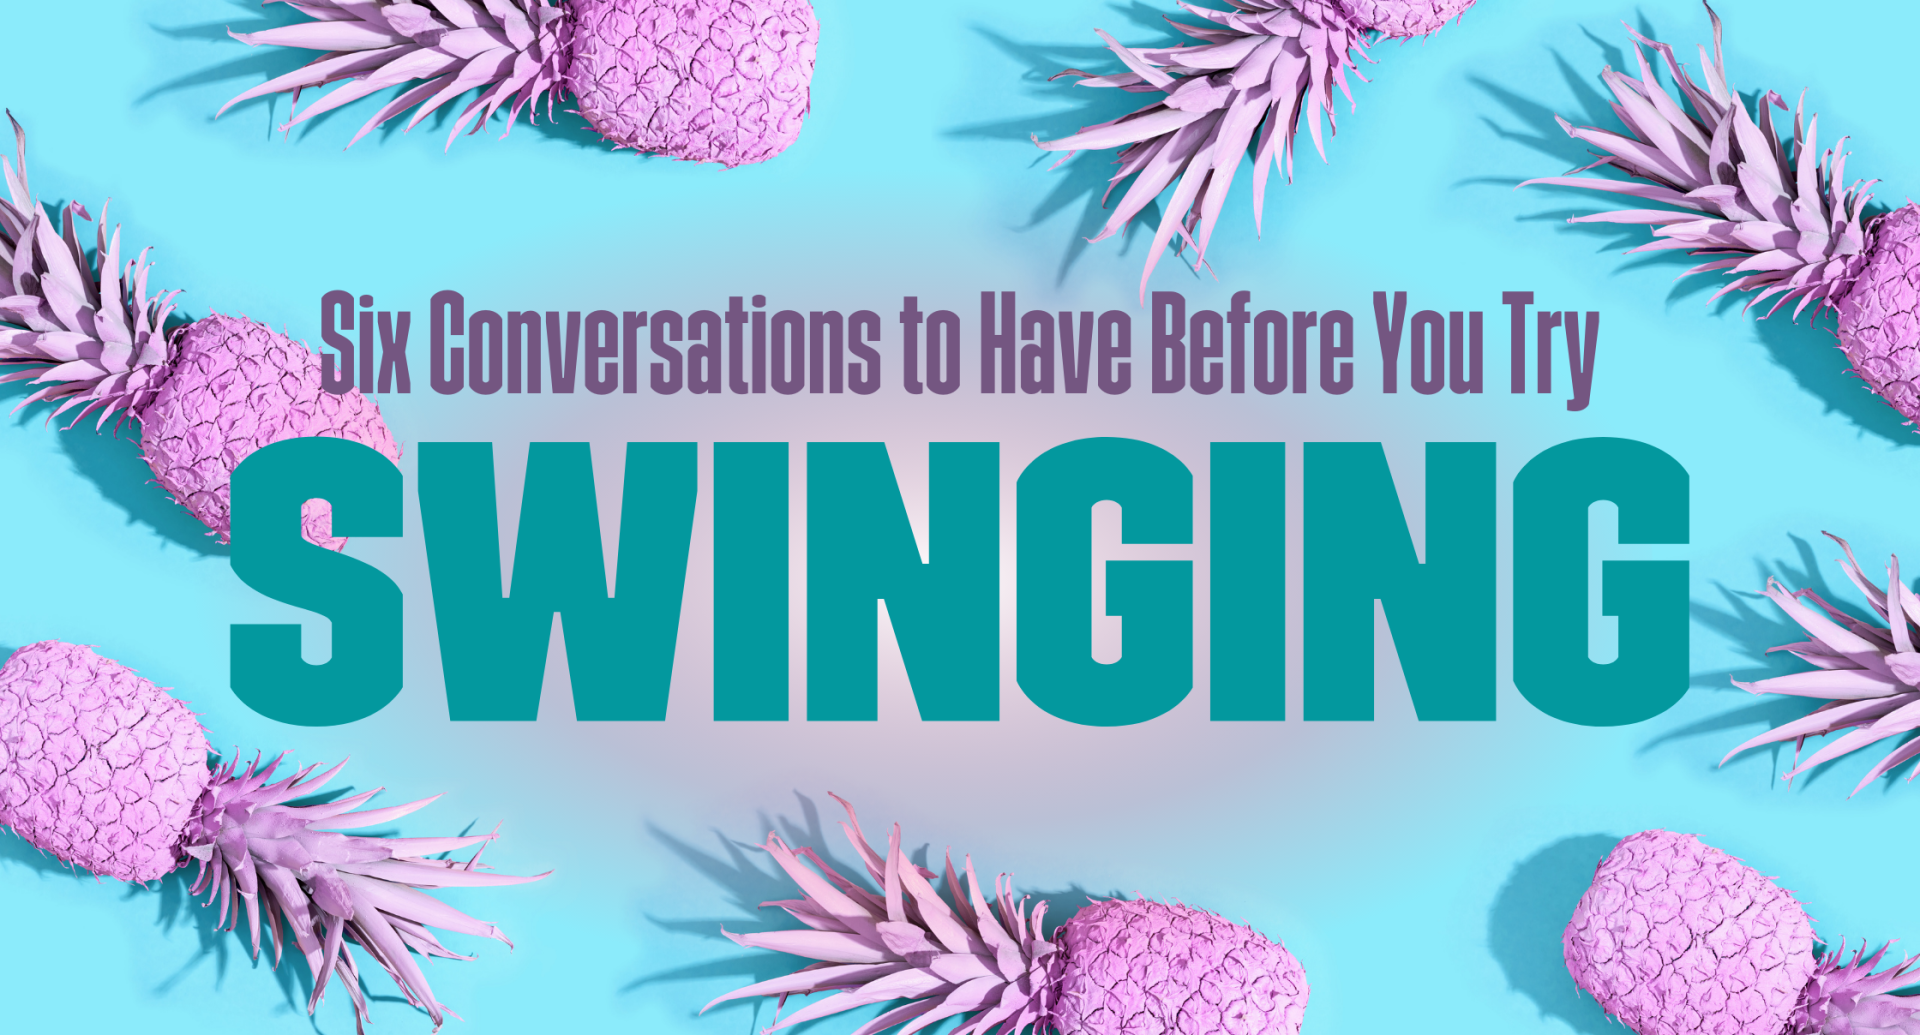 6 Conversations to Have Before You Try Swinging picture pic